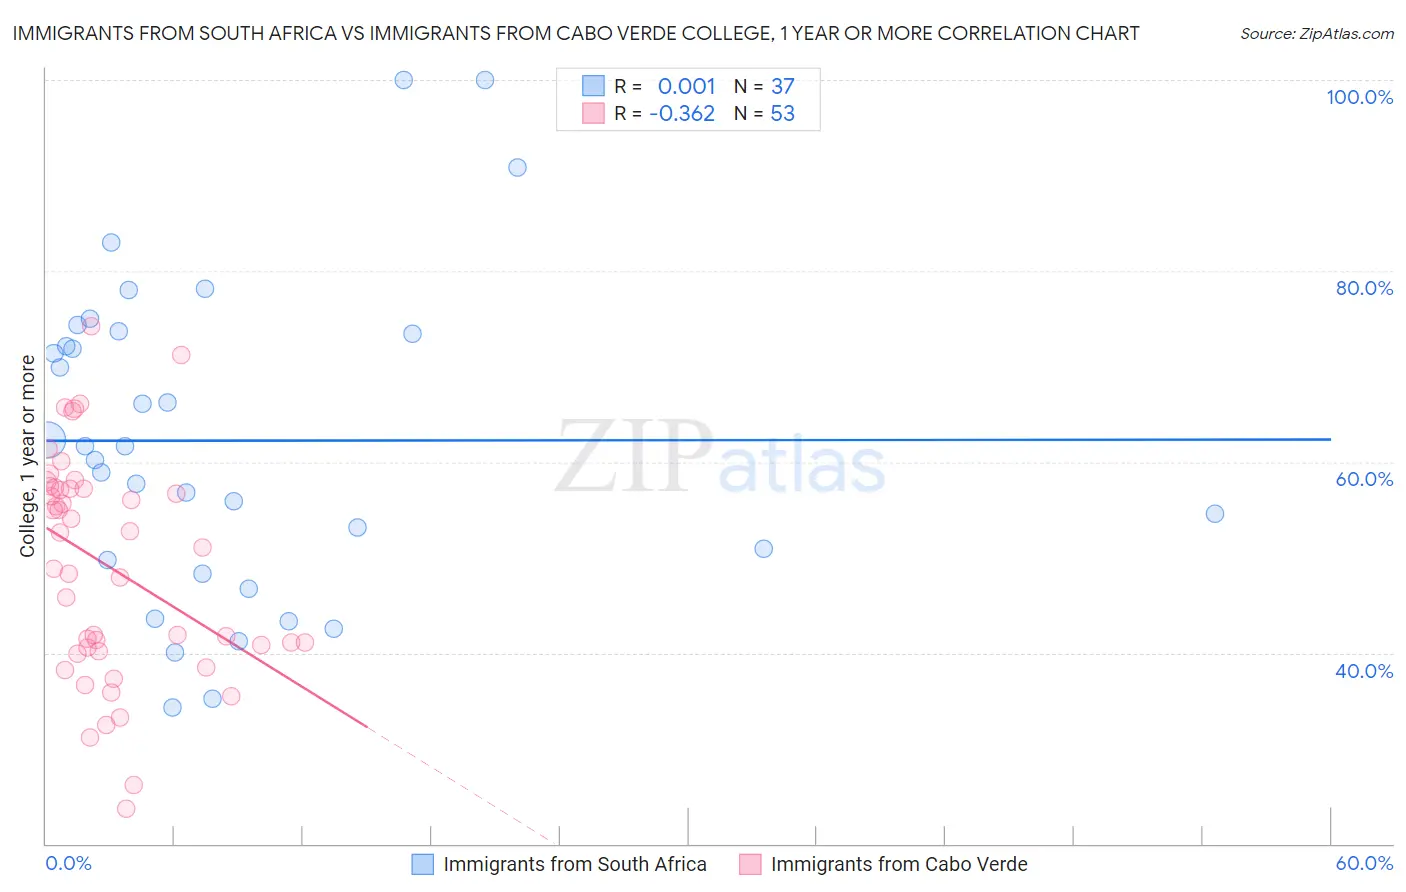 Immigrants from South Africa vs Immigrants from Cabo Verde College, 1 year or more